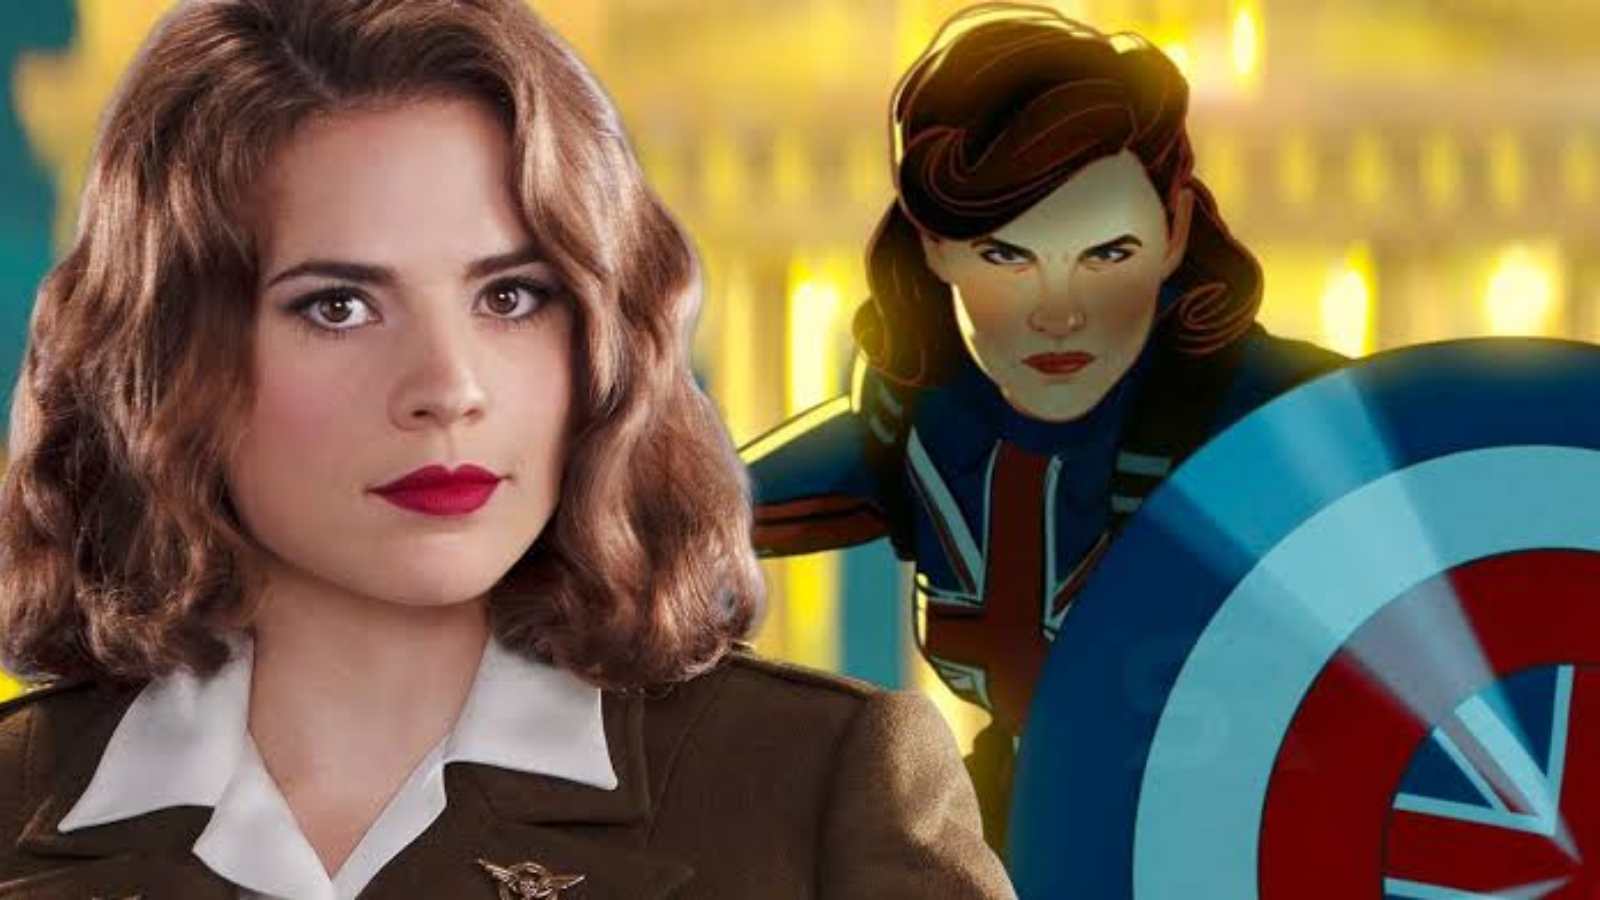 Hayley Atwell as Captain Carter